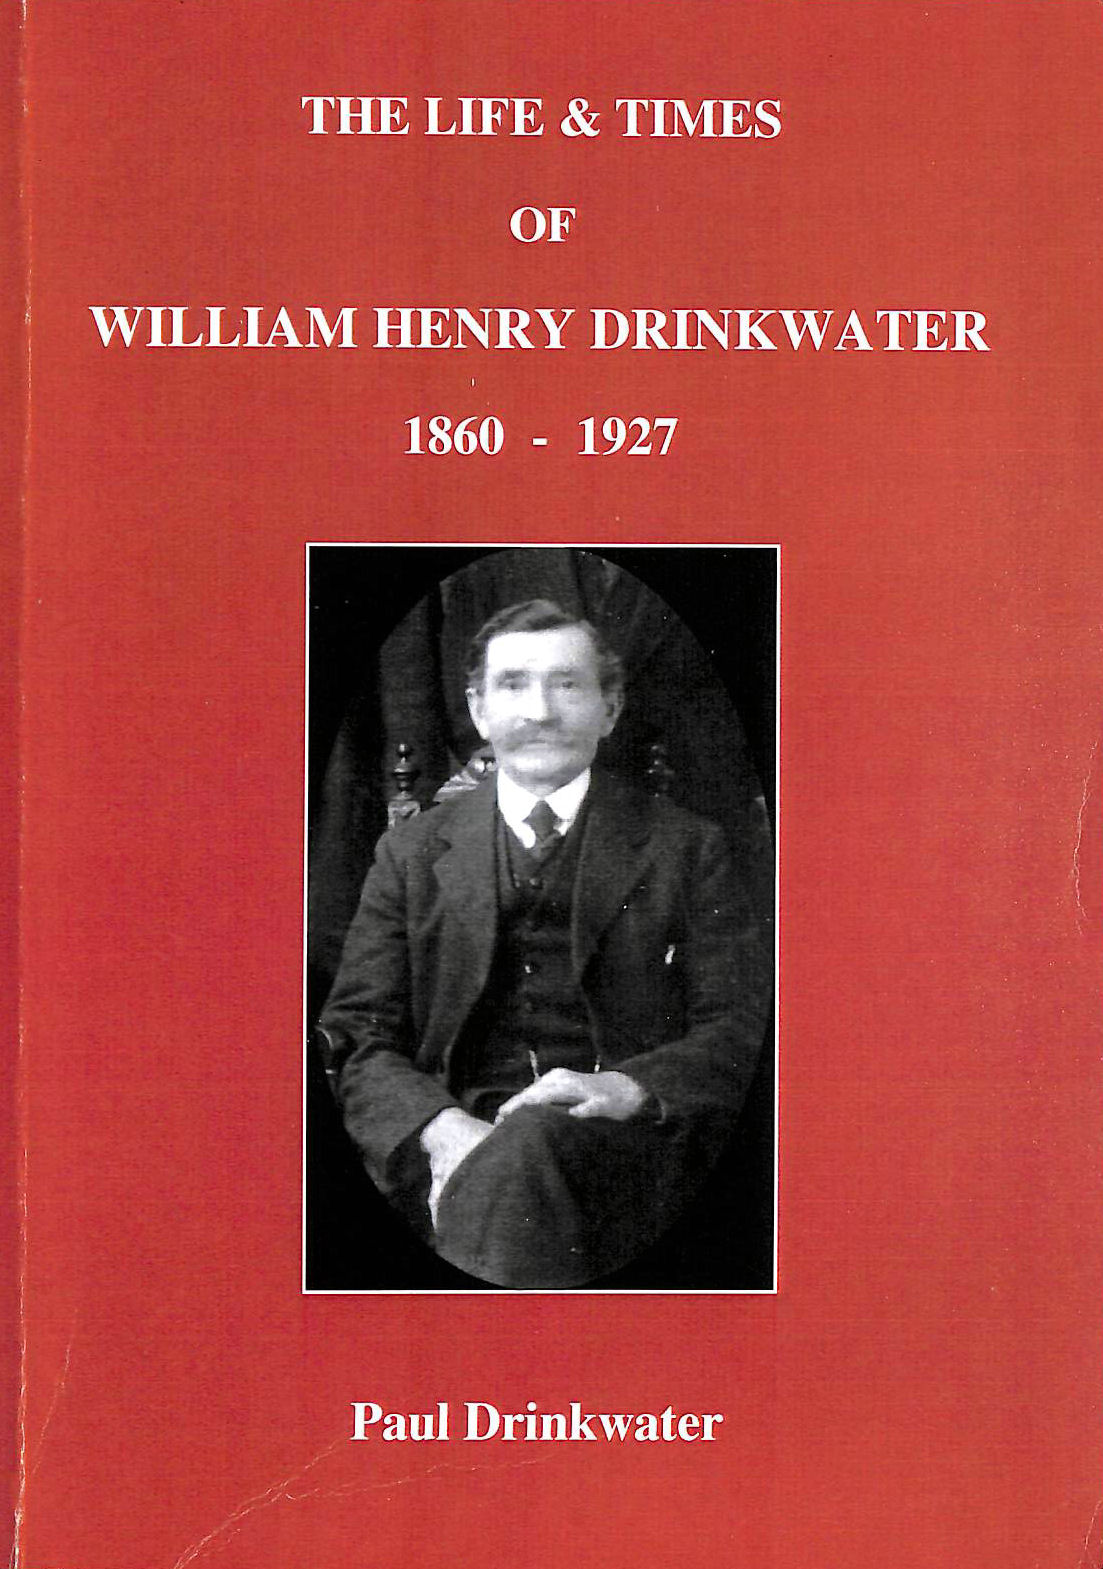 PAUL DRINKWATER - THE LIFE AND TIMES OF WILLIAM HENRY DRINKWATER 1860-1927